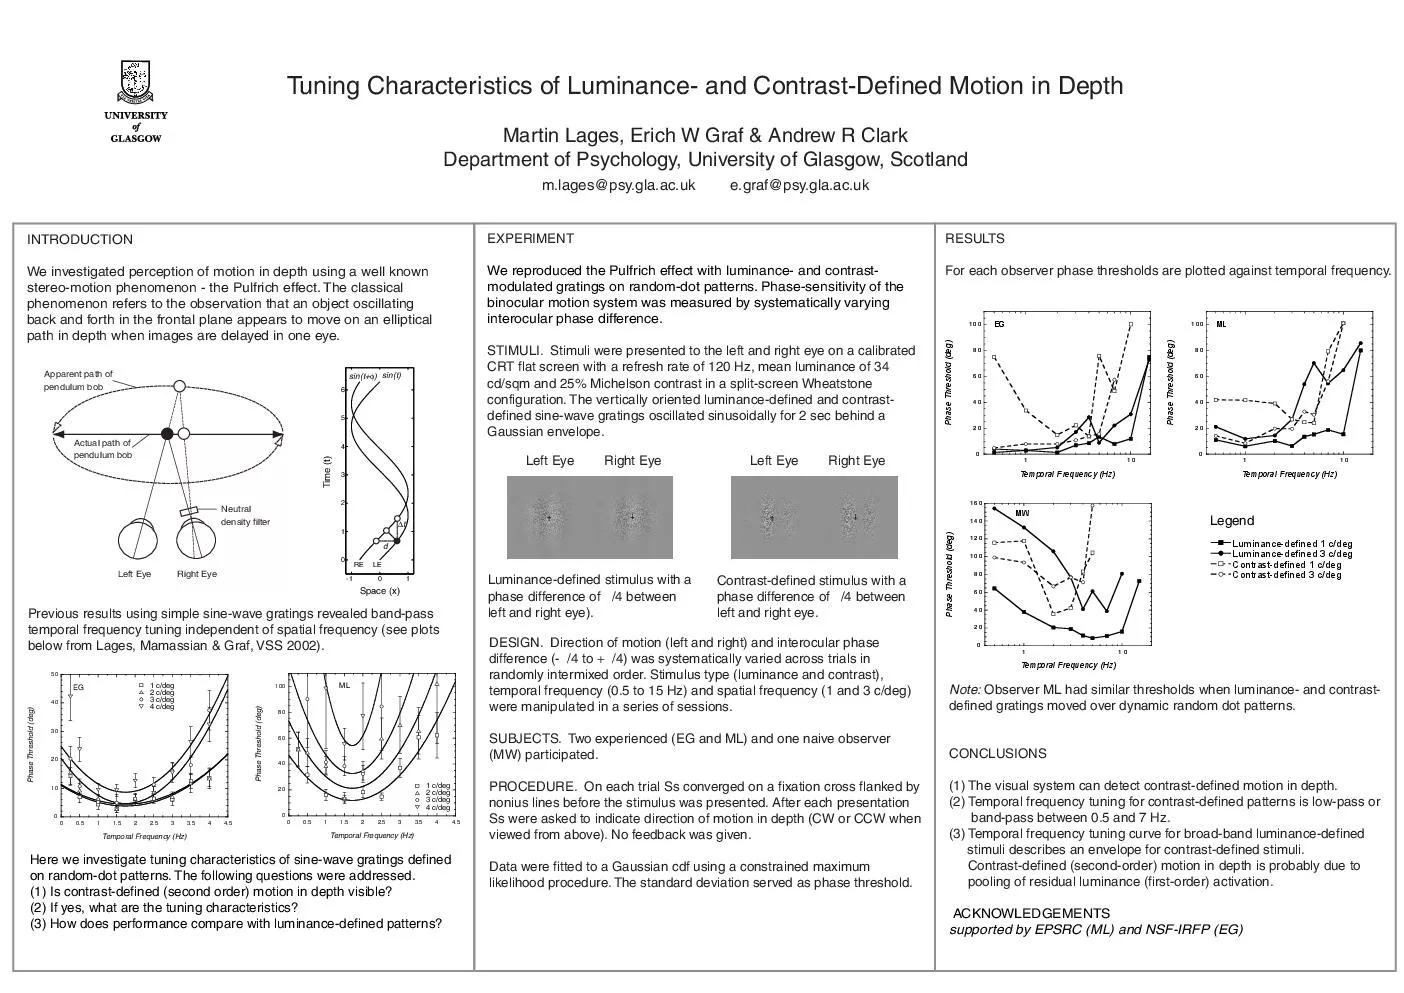 uning Char acter istics of Luminance and Contr astDefined Motion in Depth Mar tin Lages